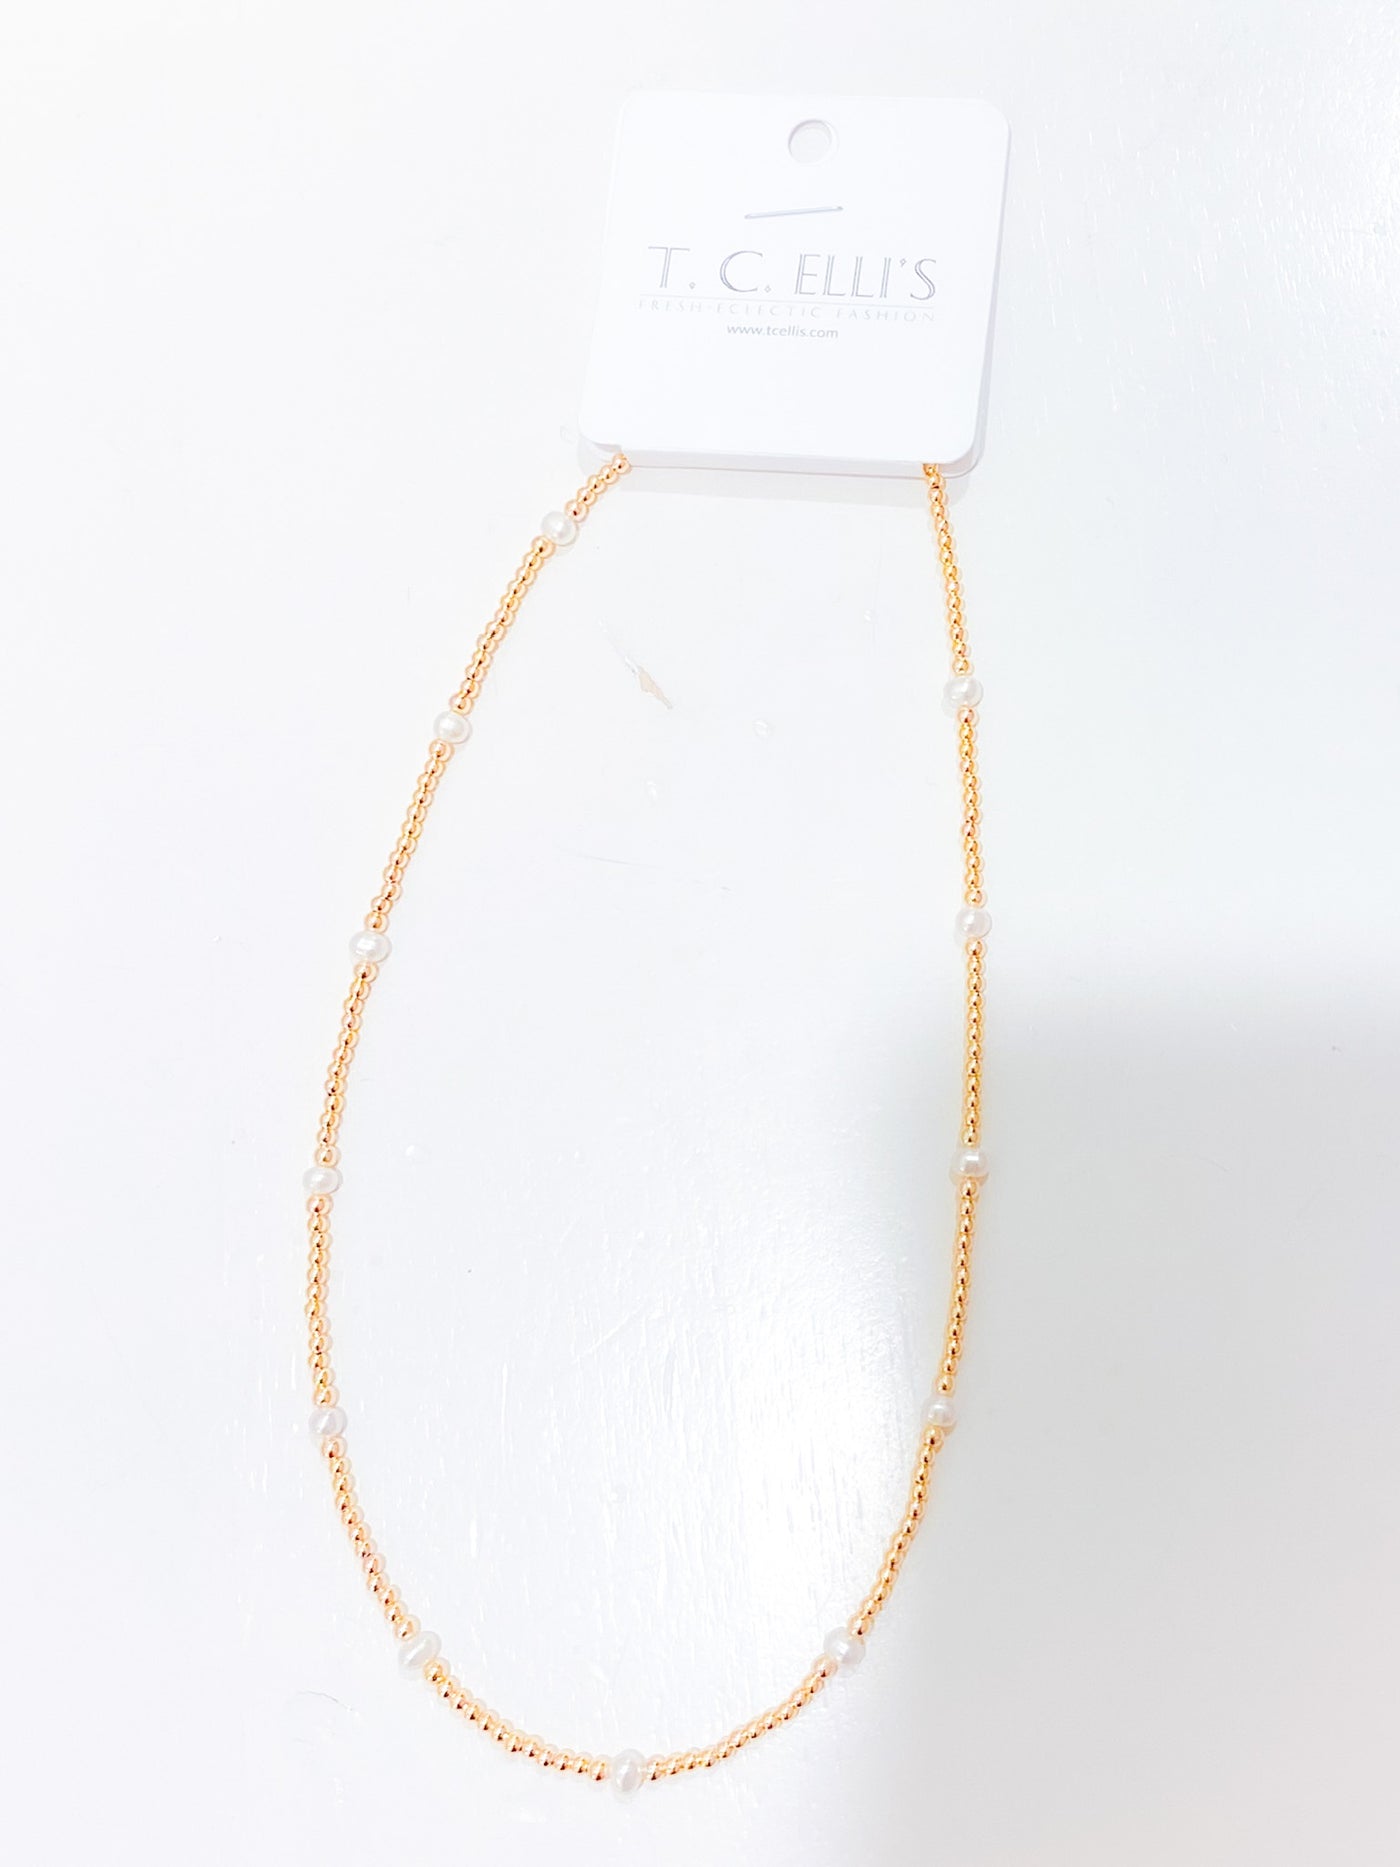 Acala Pearl Necklace